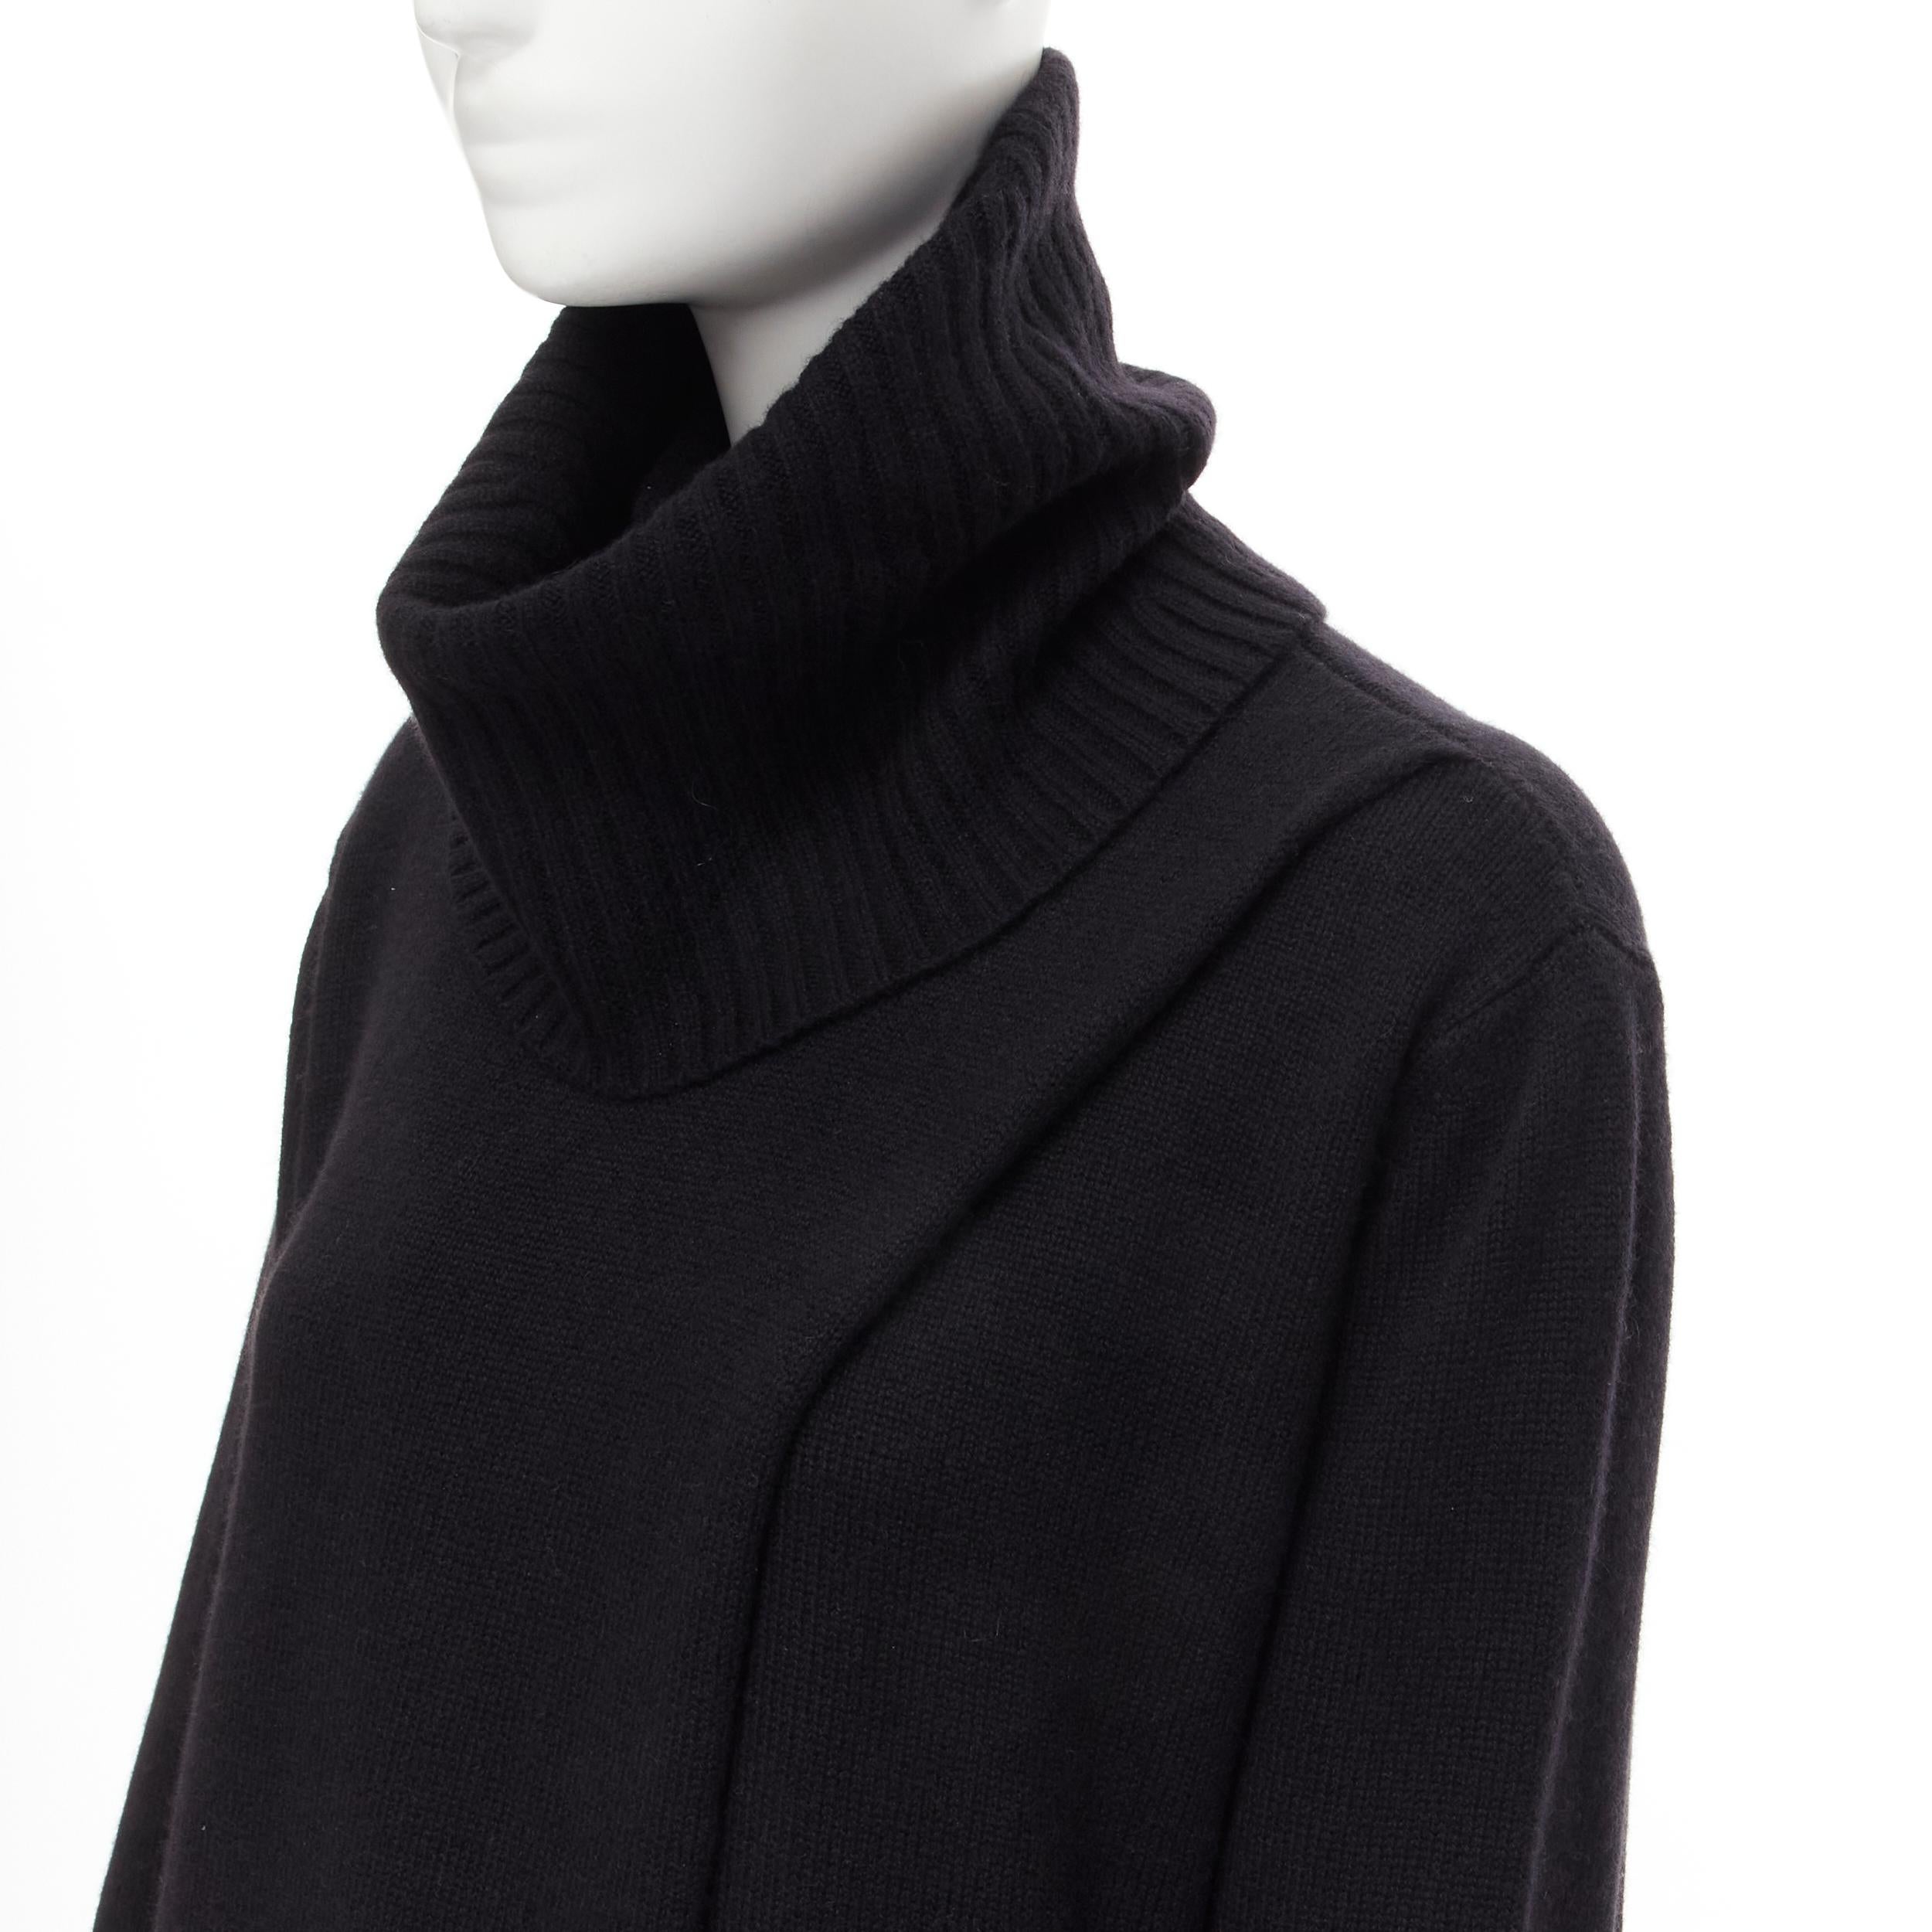 new THE ROW Kirsi 100% cashmere black split front turtleneck sweater tunic S 
Reference: MELK/A00101 
Brand: The Row 
Material: Cashmere 
Color: Black 
Pattern: Solid 
Extra Detail: Split front. 
Made in: USA 

CONDITION: 
Condition: New with tags.